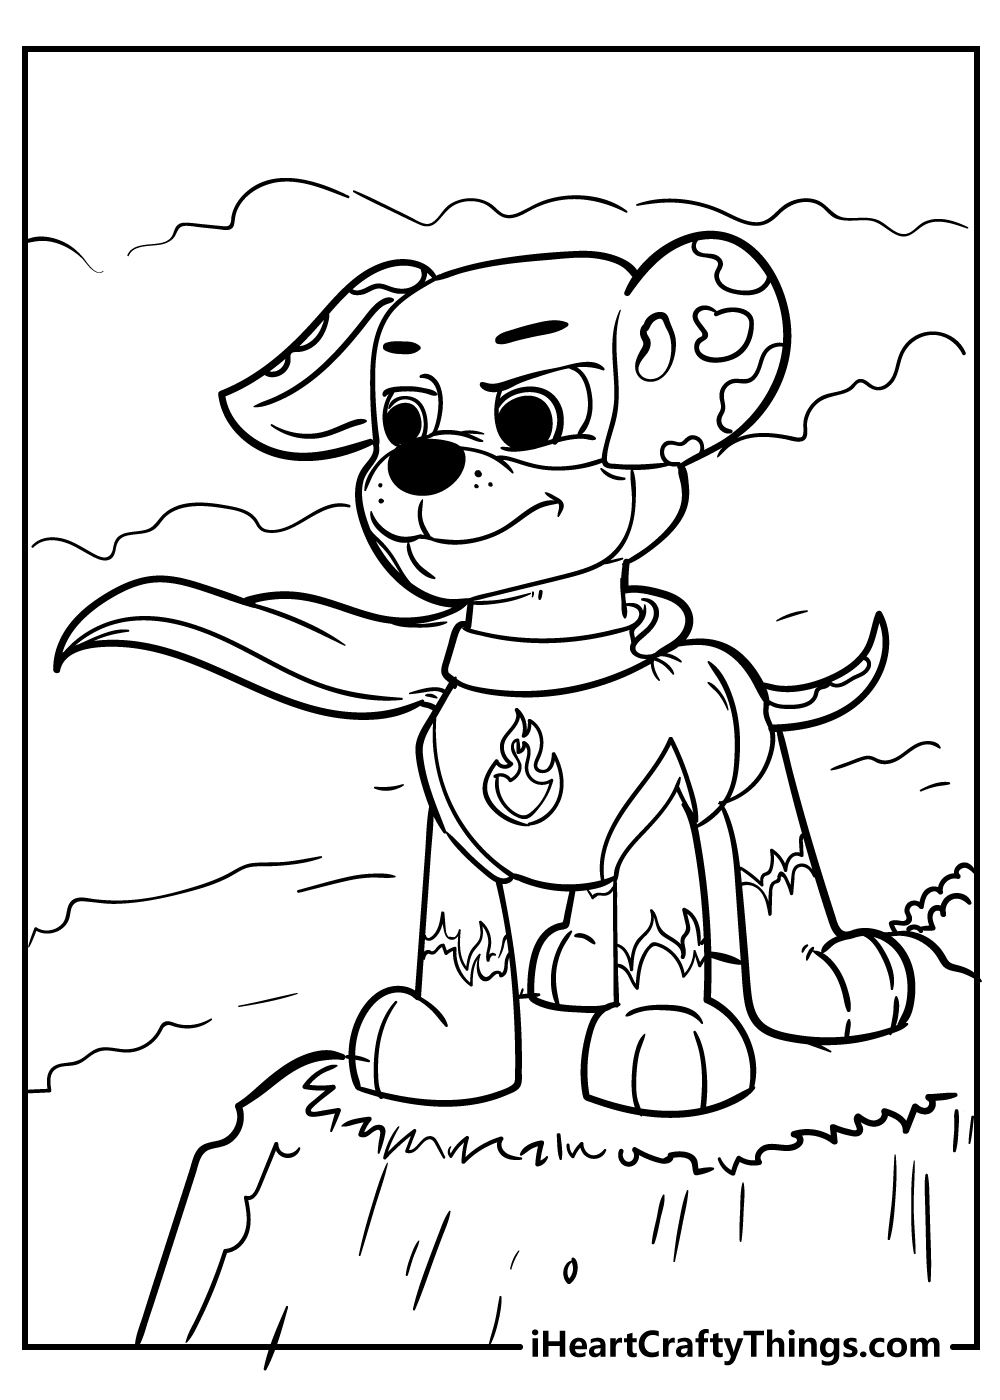 Paw Patrol Coloring Pages FREE Printable 77